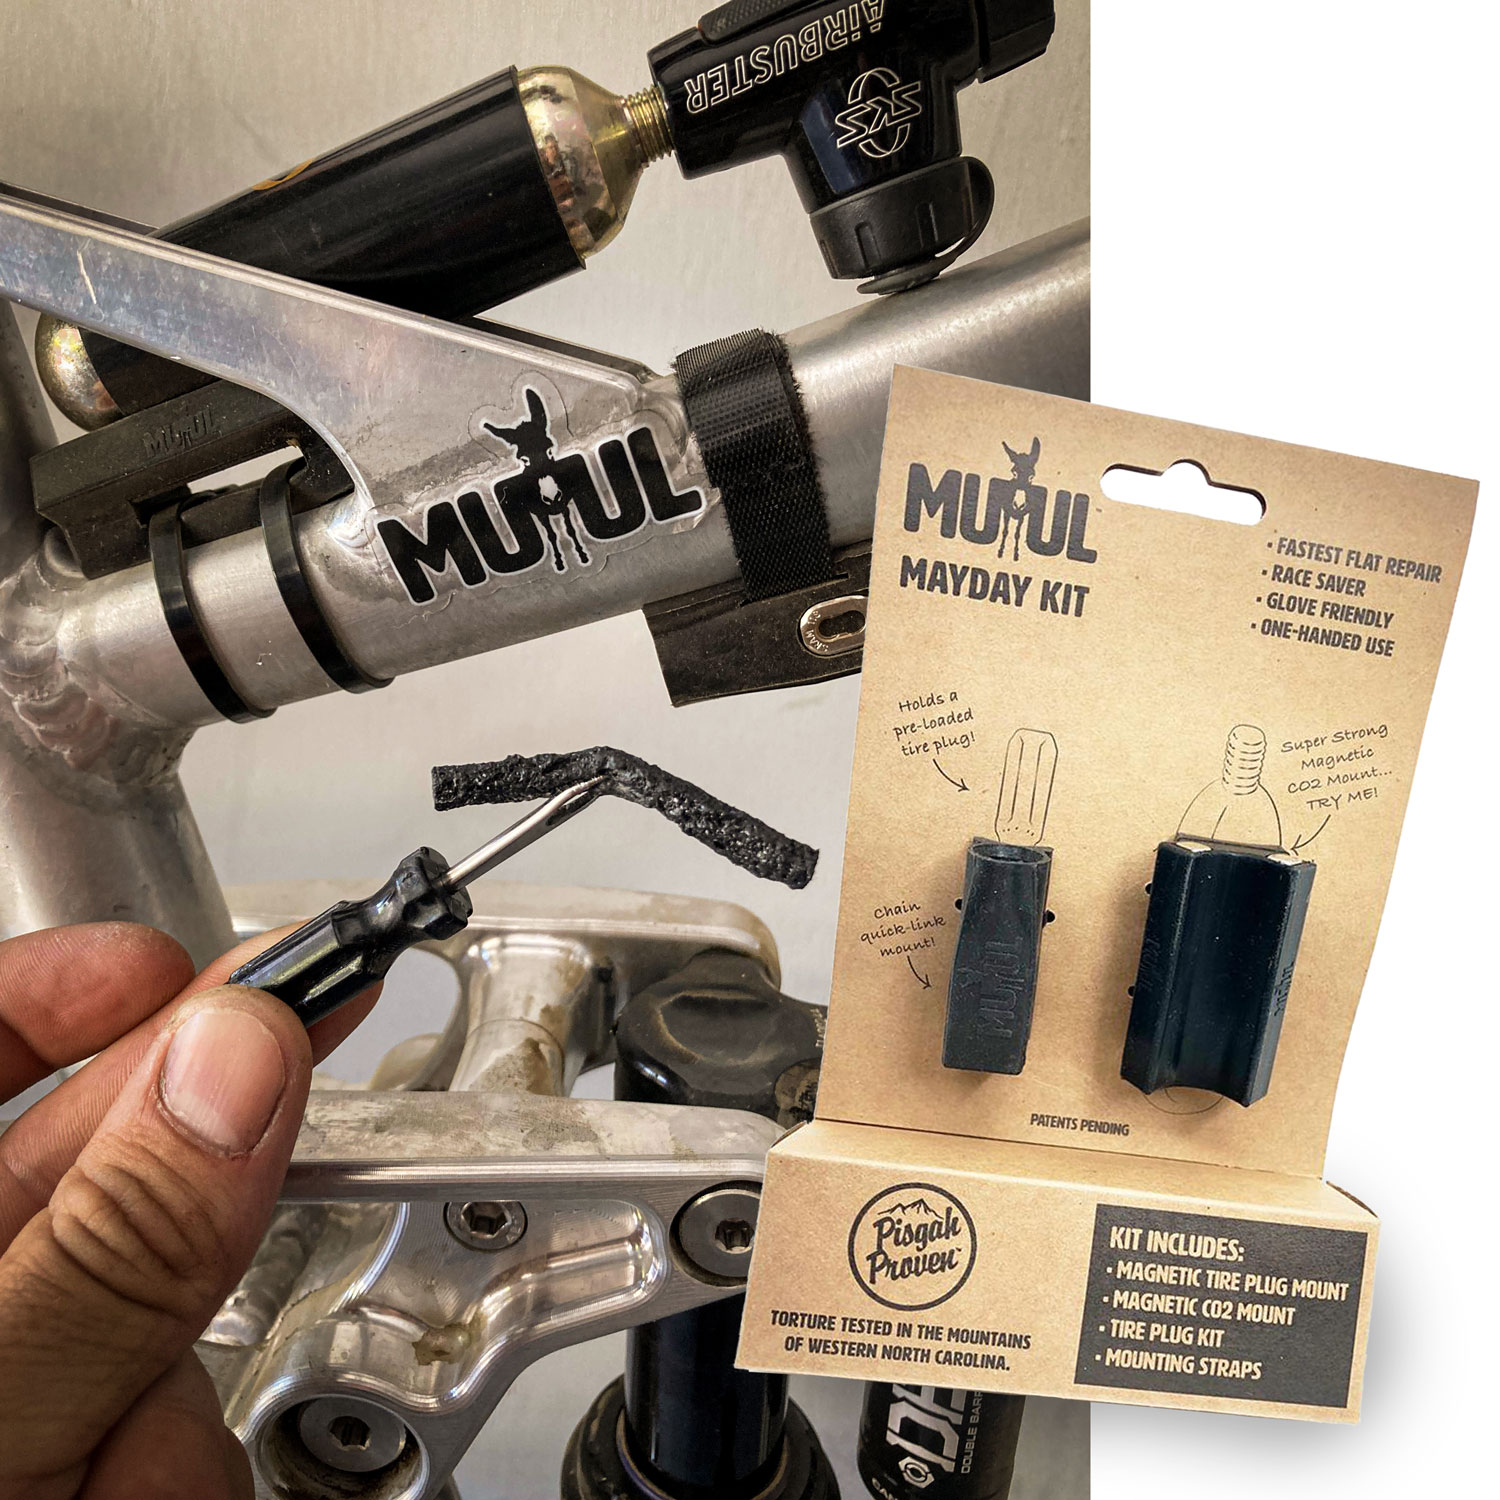 MUUL Mayday Kit Review